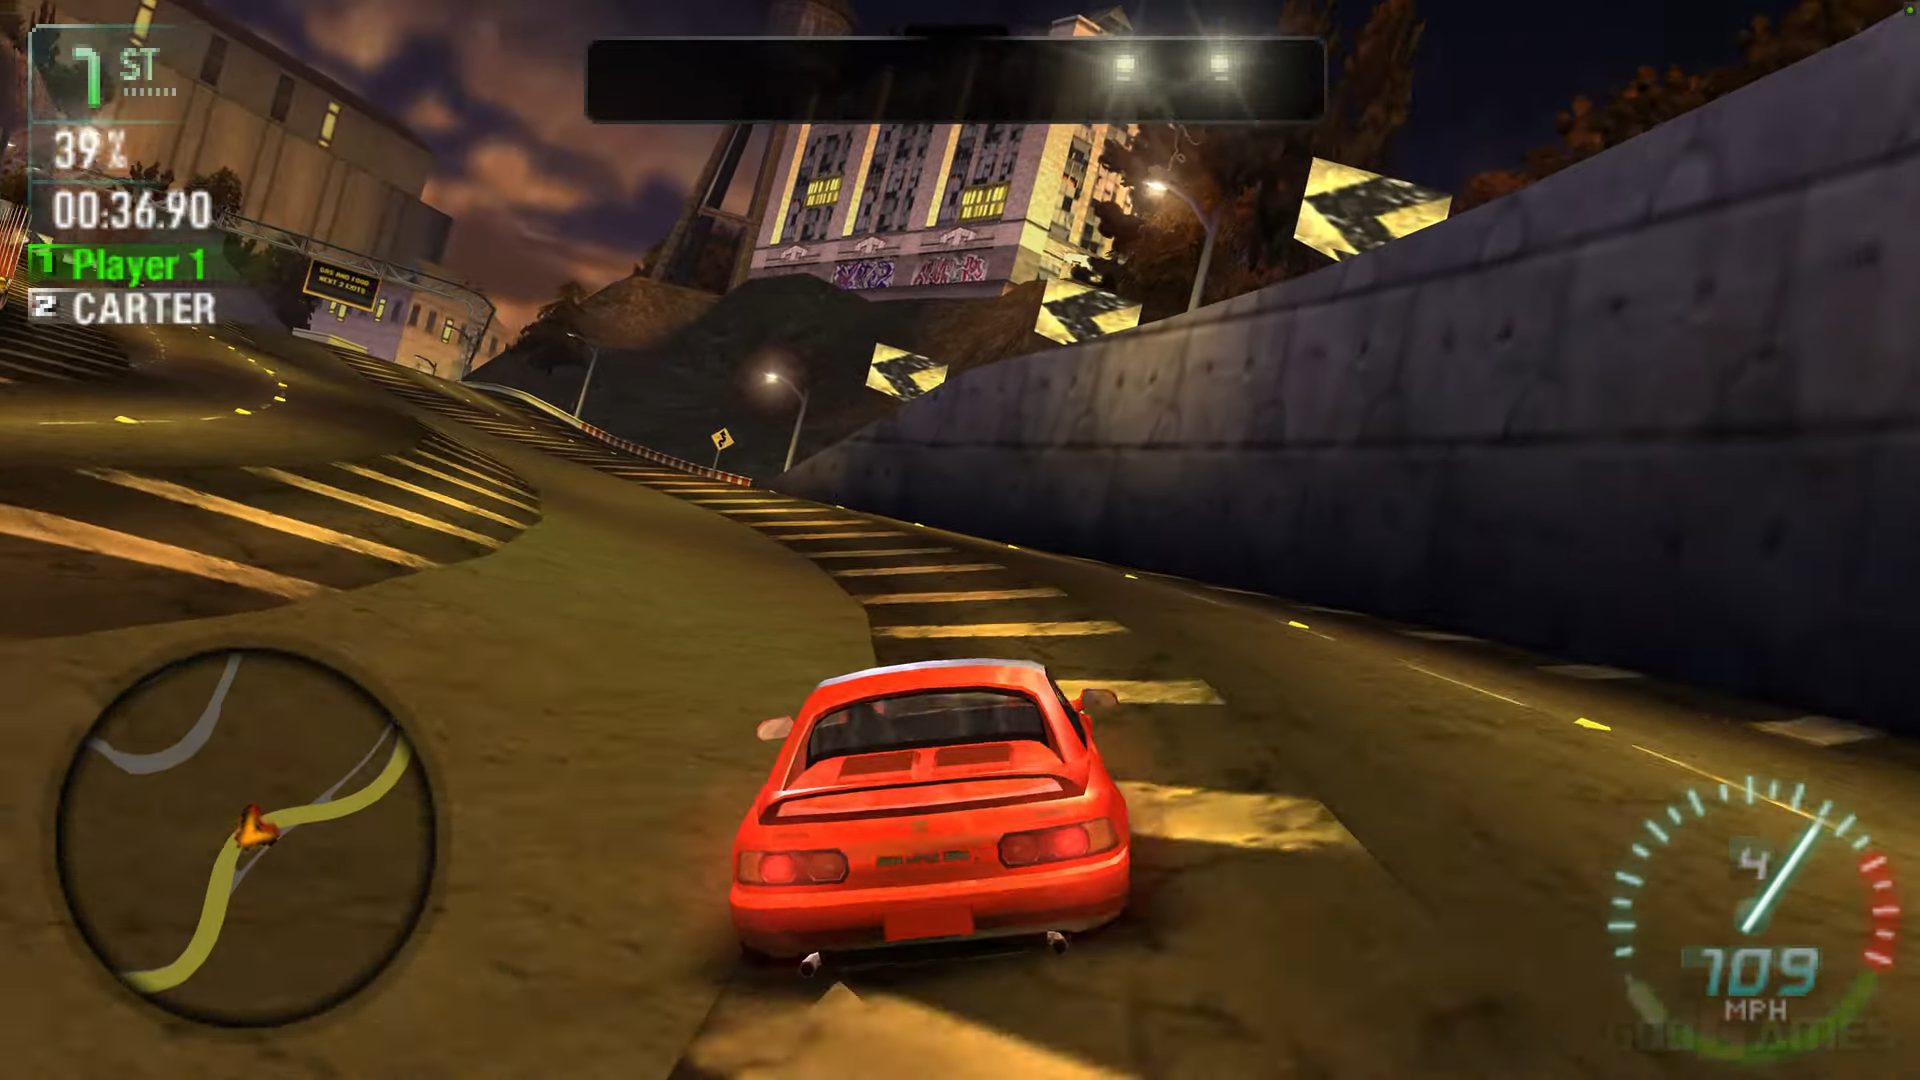 Need for Speed Carbon - Own the City ROM (Download for GBA)